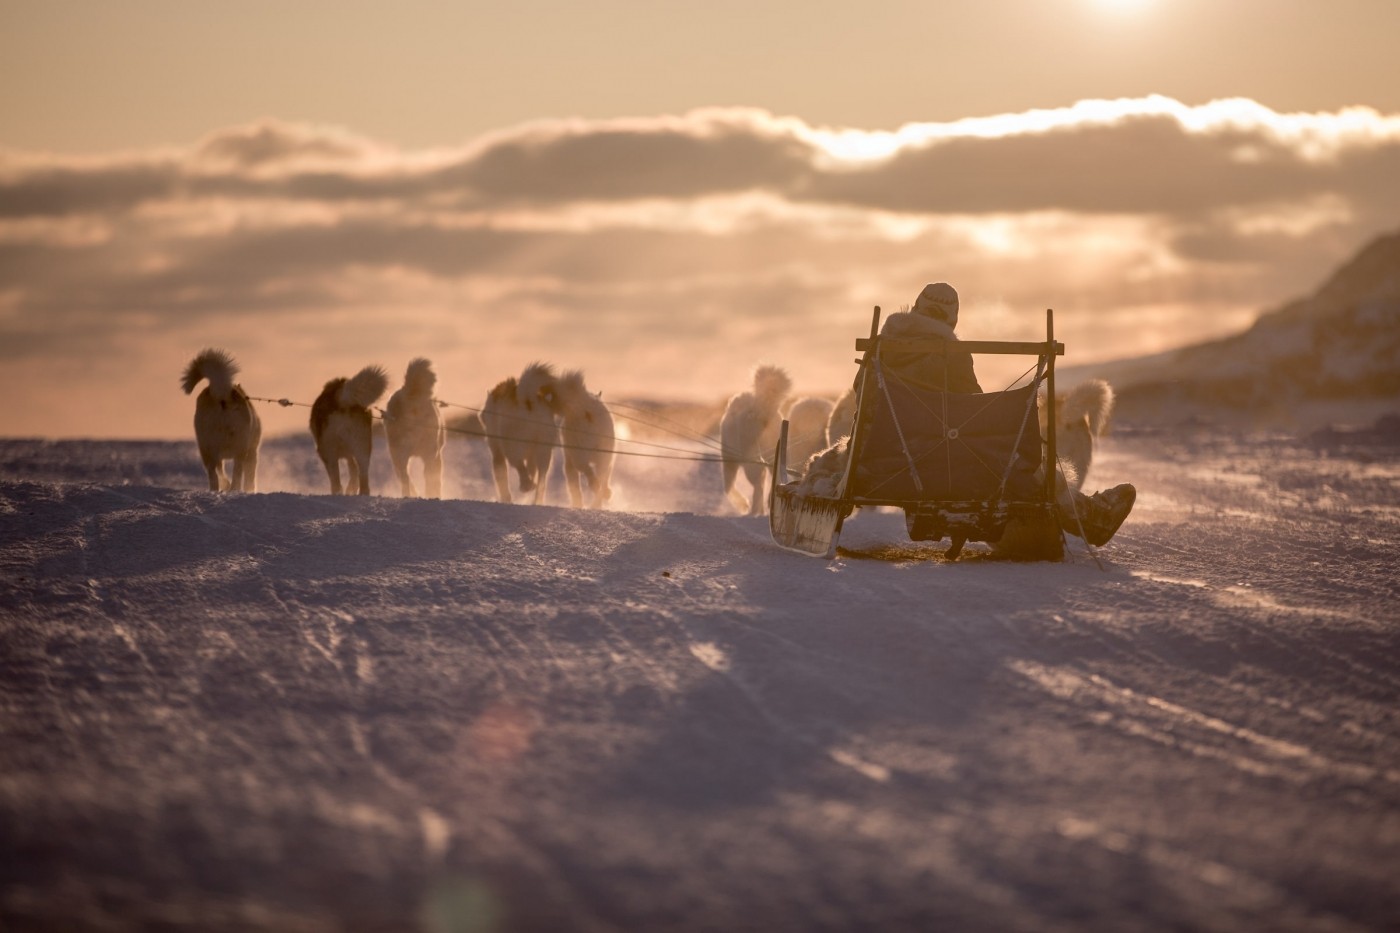 A dog sled heading into the sunset near Sisimiut in Greenland. Photo by Mads Pihl - Visit Greenland